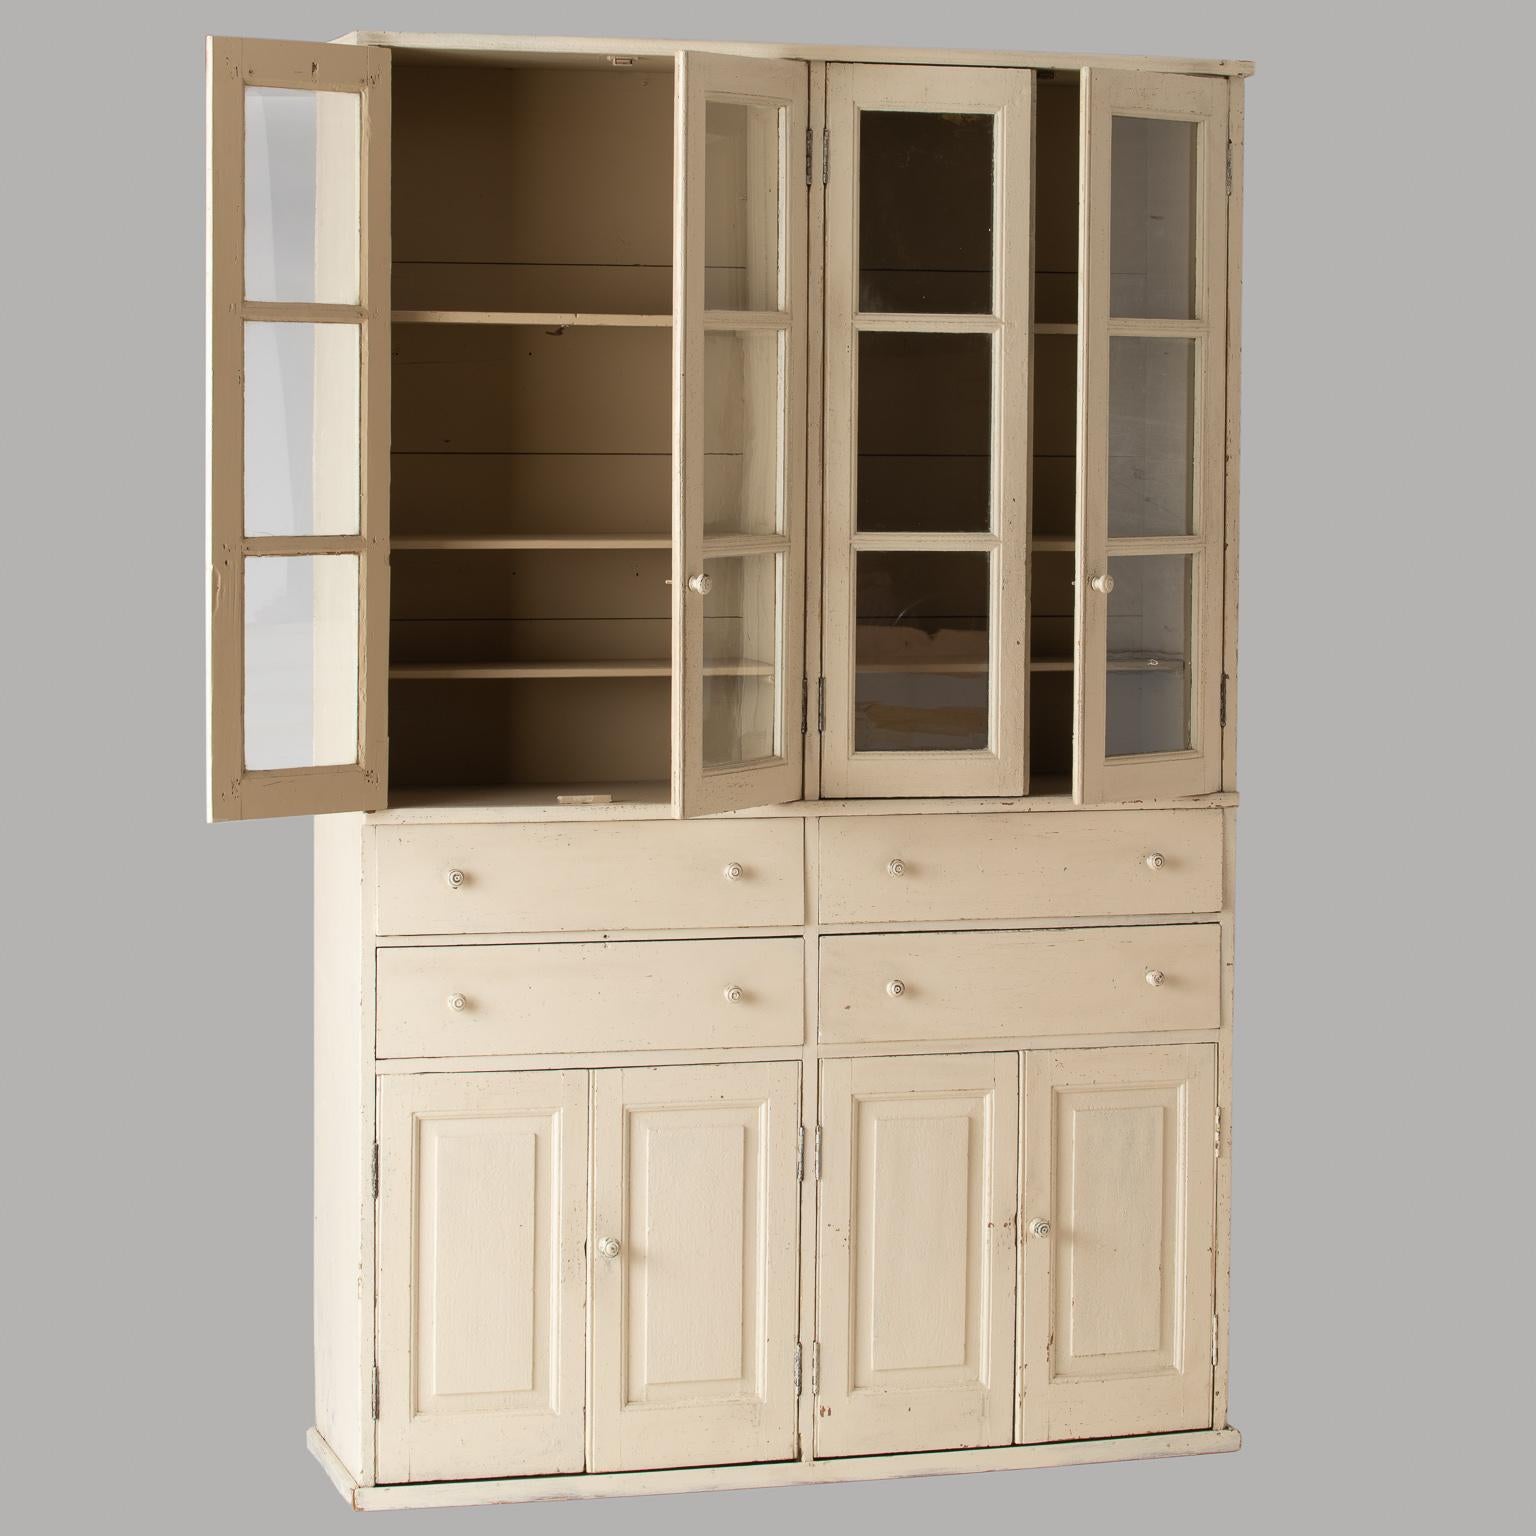 This useful cupboard has the look of a piece that might have been the focal point of a country kitchen in Provence. With glass doors and three interior shelves, it is ideal for displaying glasses, and the four centre drawers are the perfect spot for